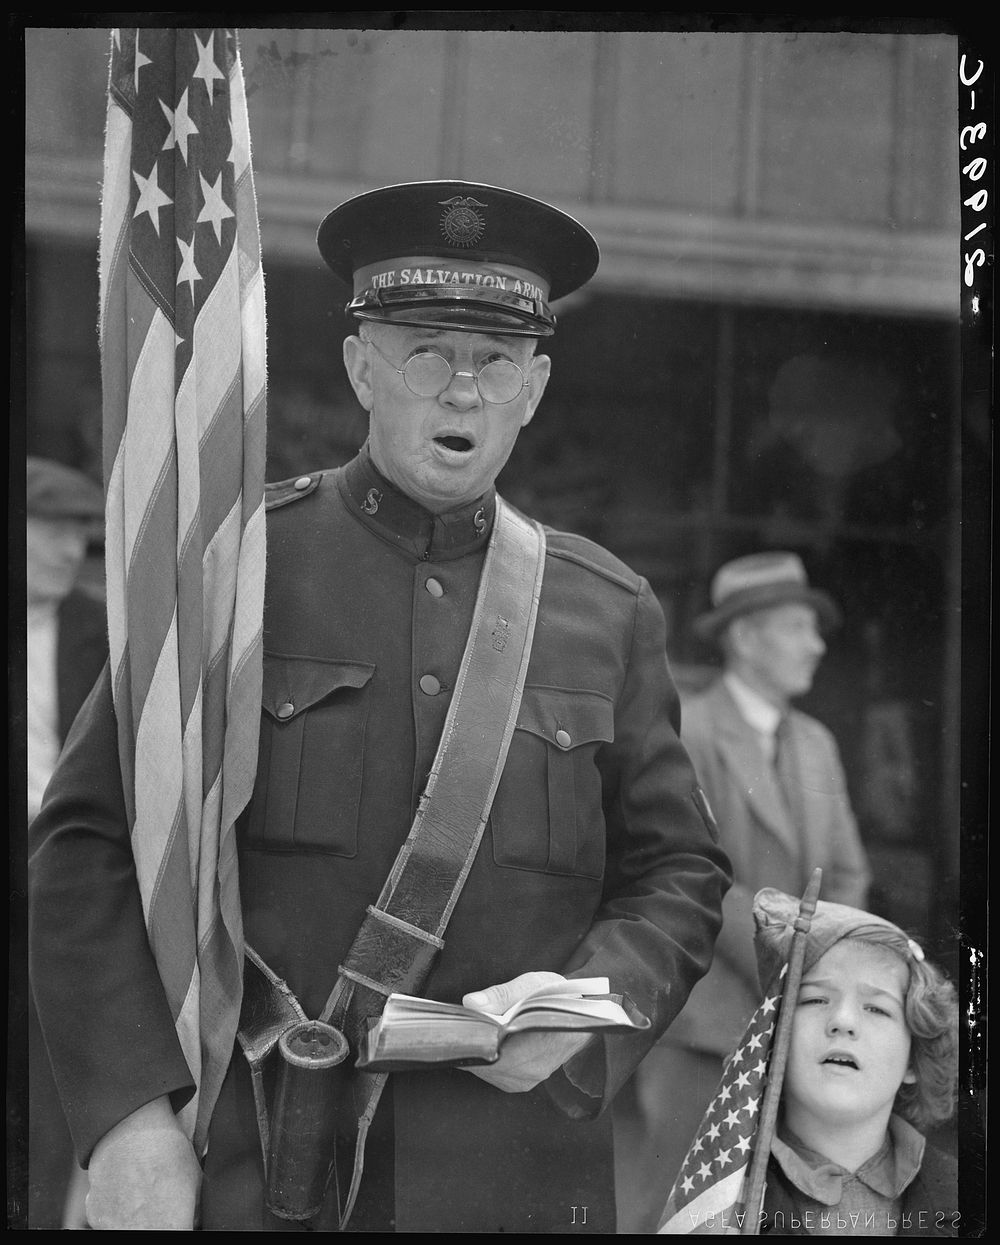 Salvation Army. San Francisco, California. Sourced from the Library of Congress.